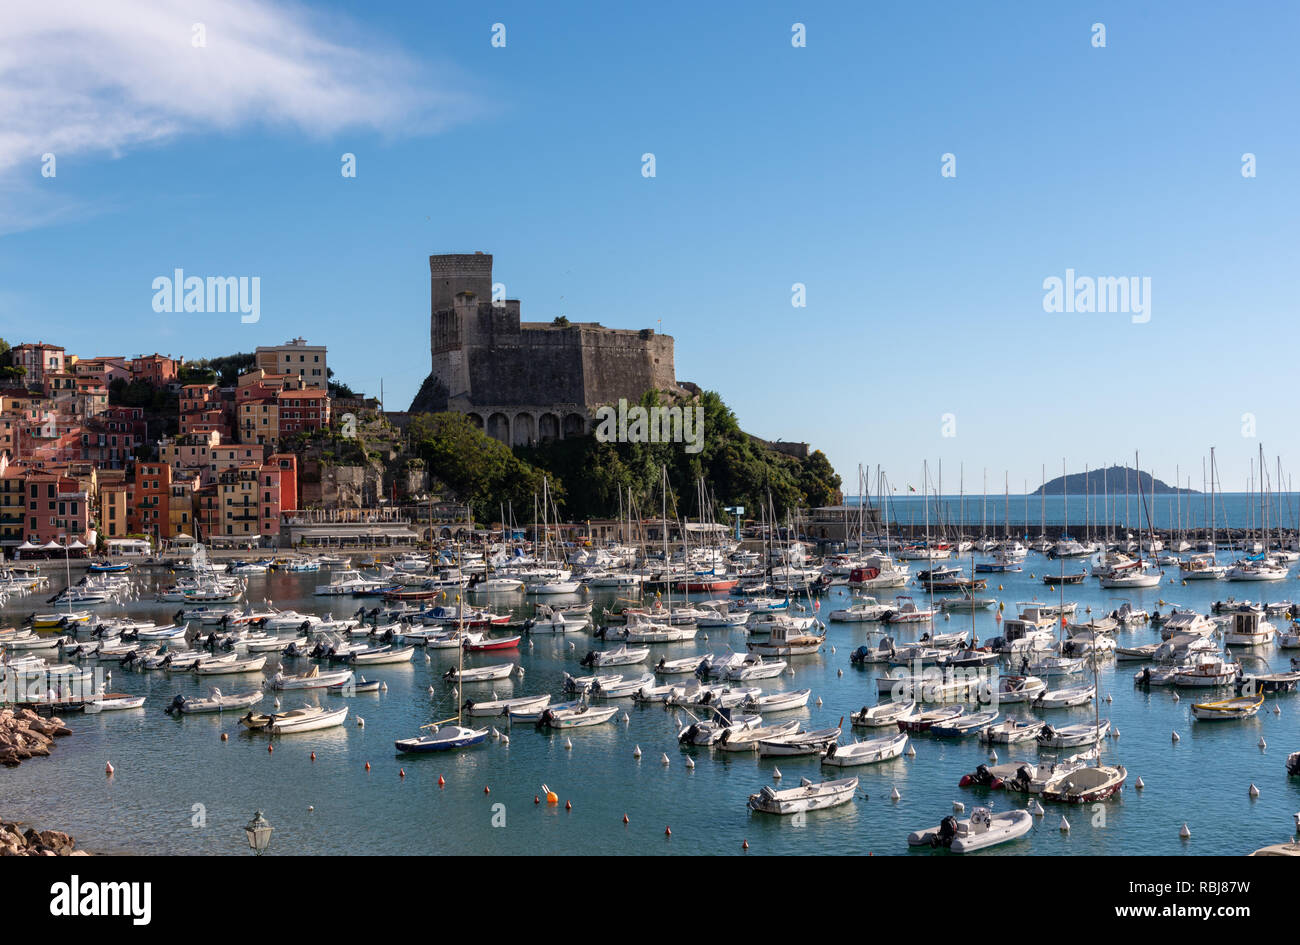 Boats anchored at harbour, with Lerici Castle and Gulf of La Spezia in the background, Lerici, Italy Stock Photo